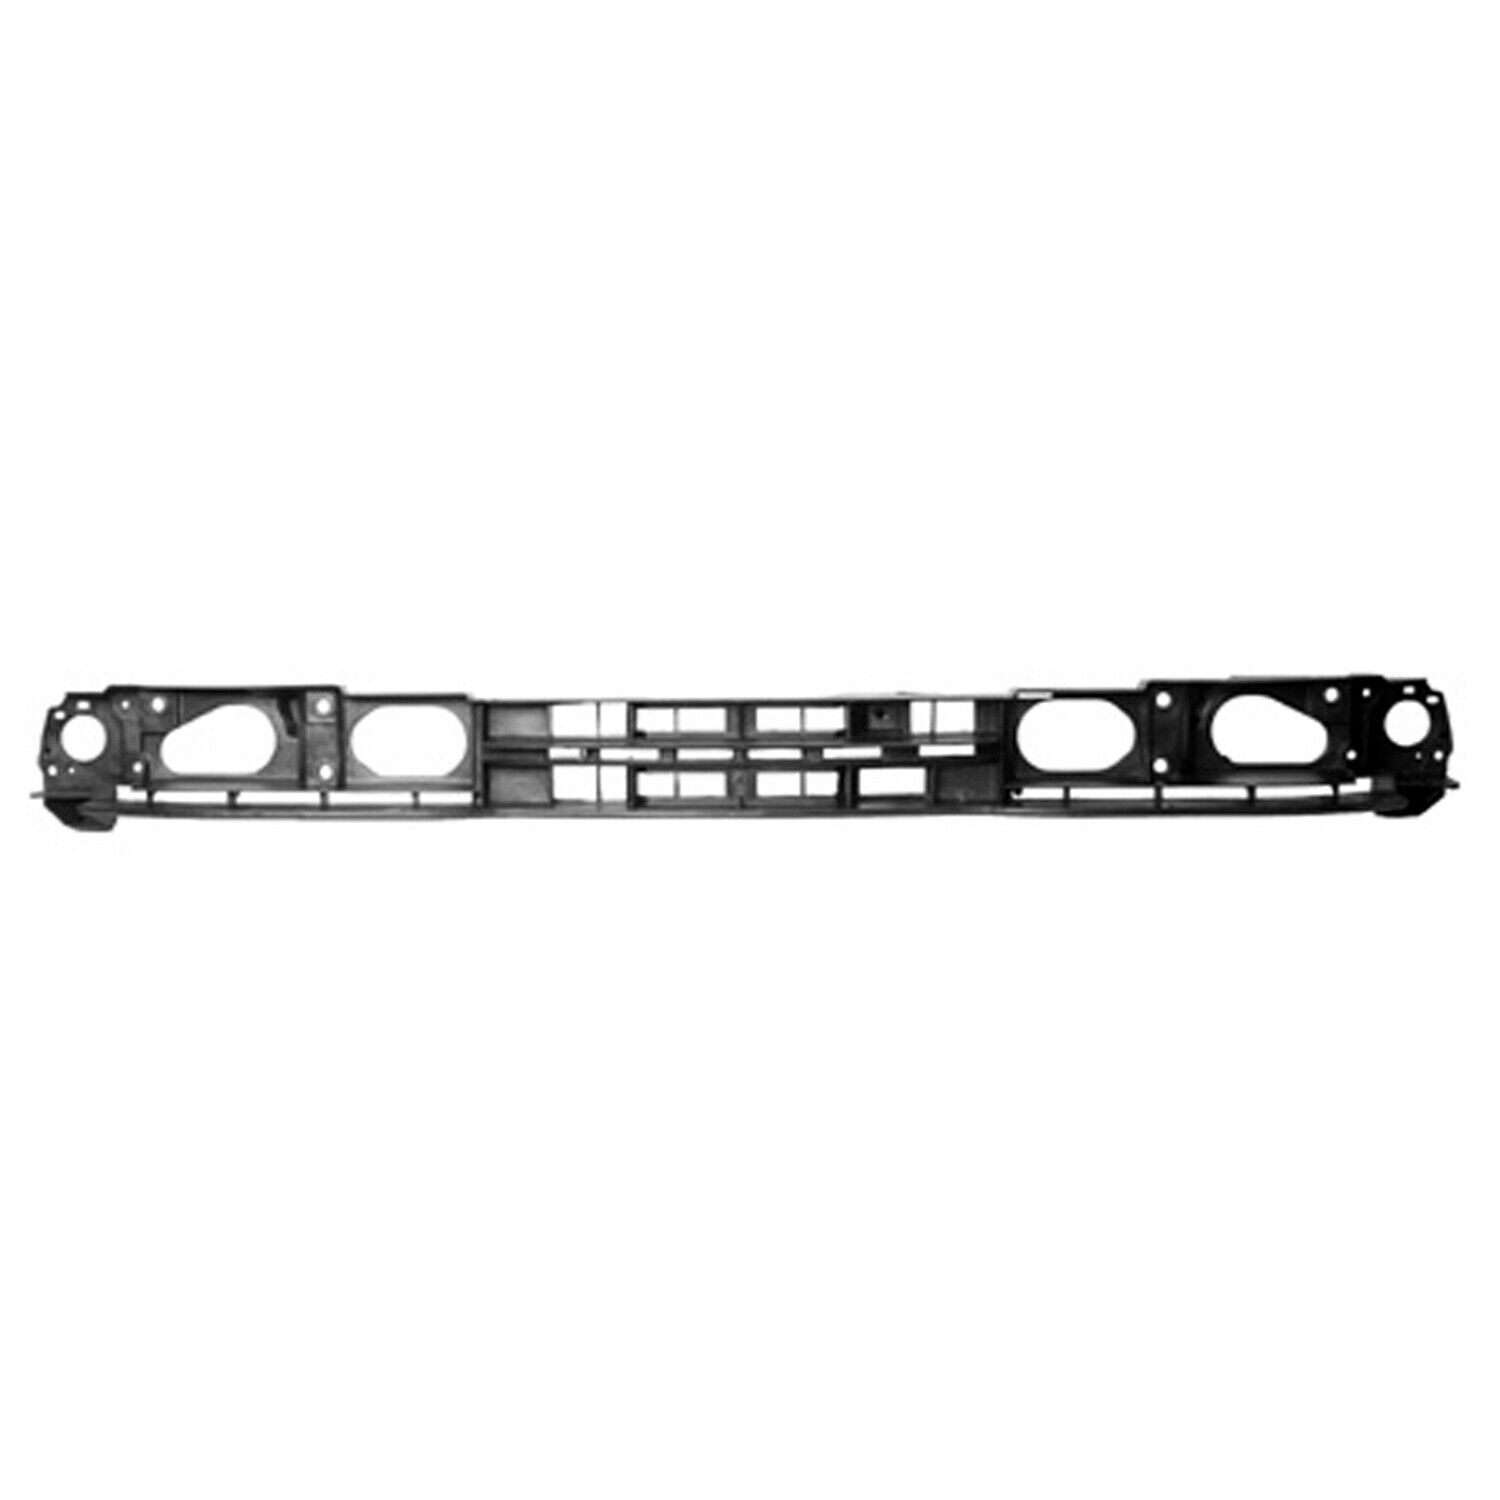 CPP FO1220204 Header Panel for 1994-1995 Ford Thunderbird